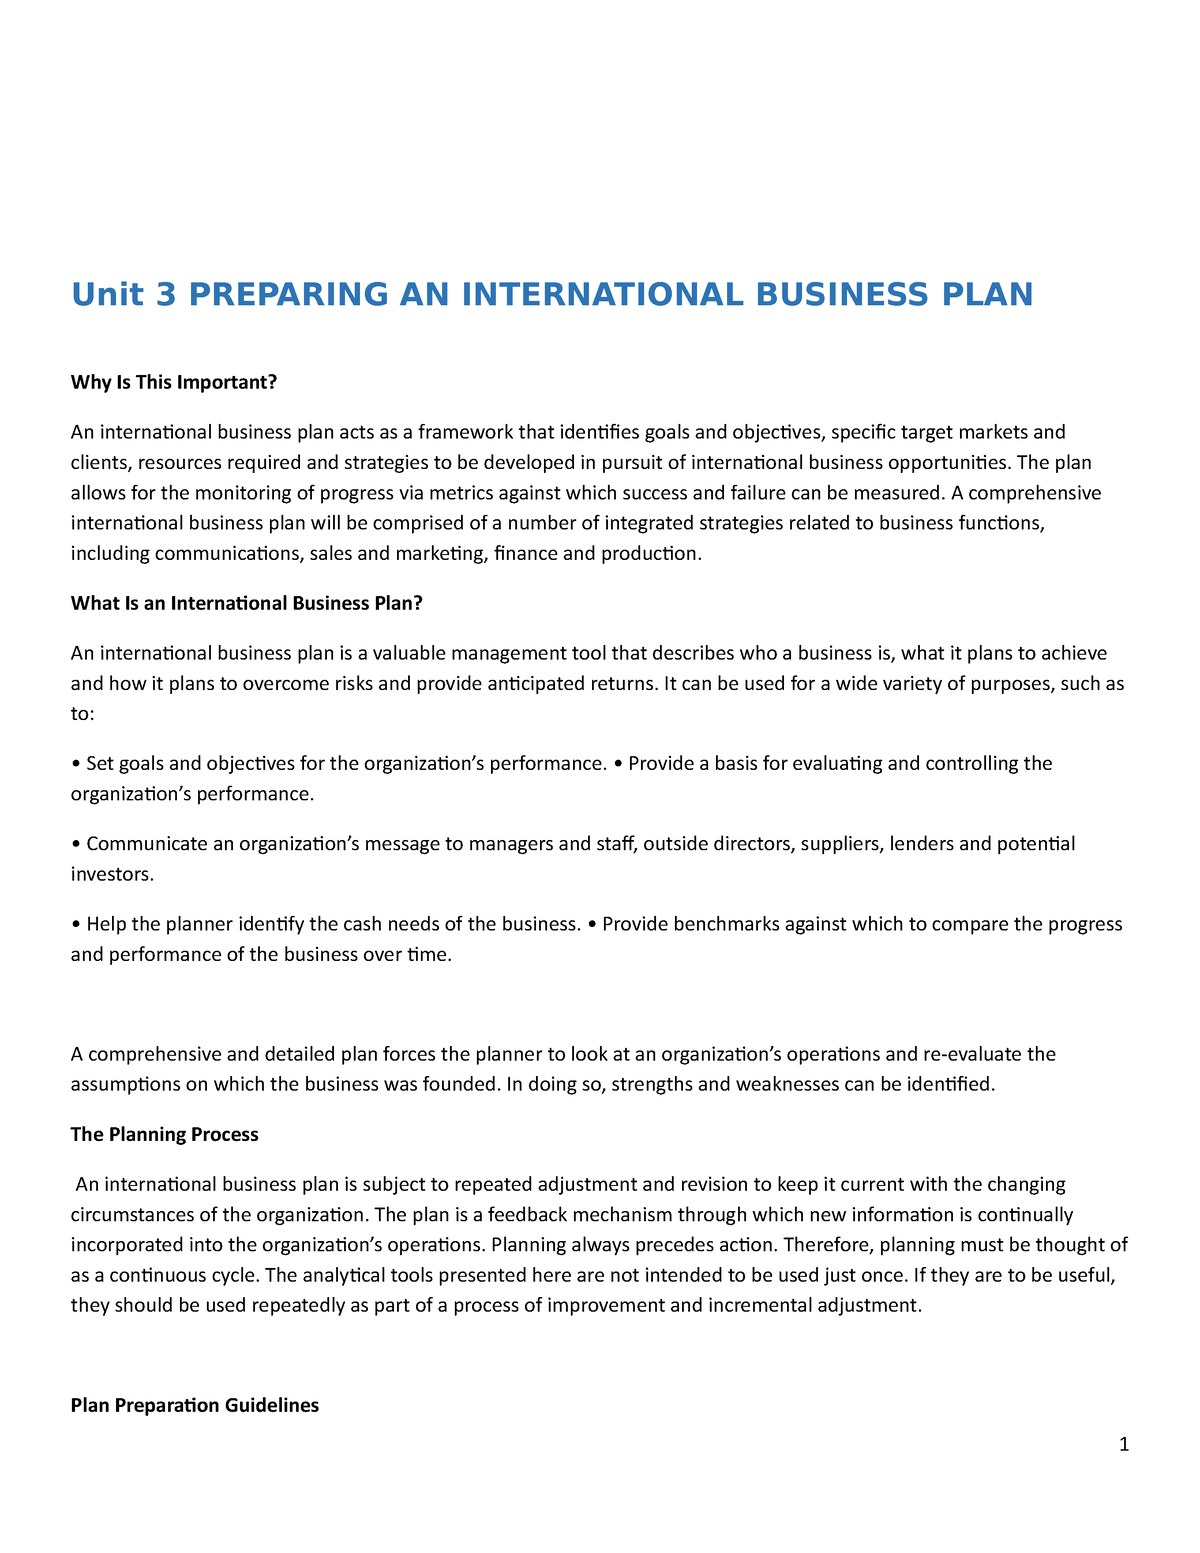 what should an international business plan include